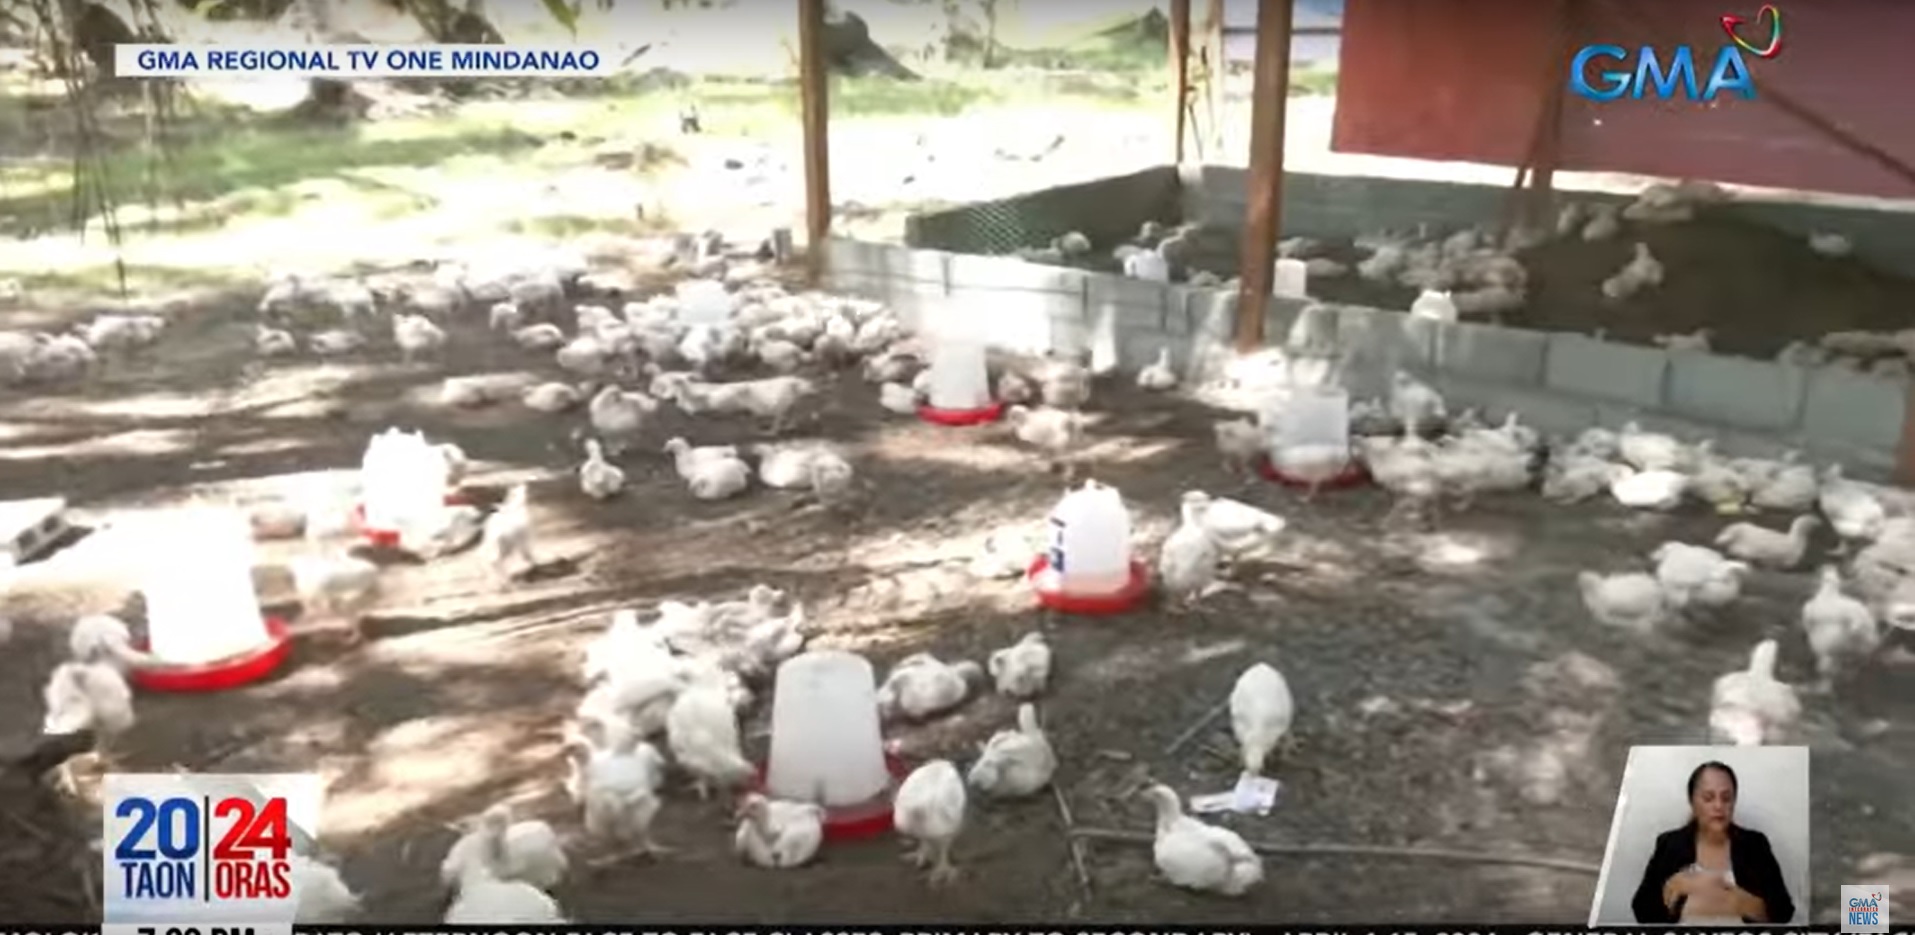 High temperatures kill 100 chickens at GenSan poultry farm